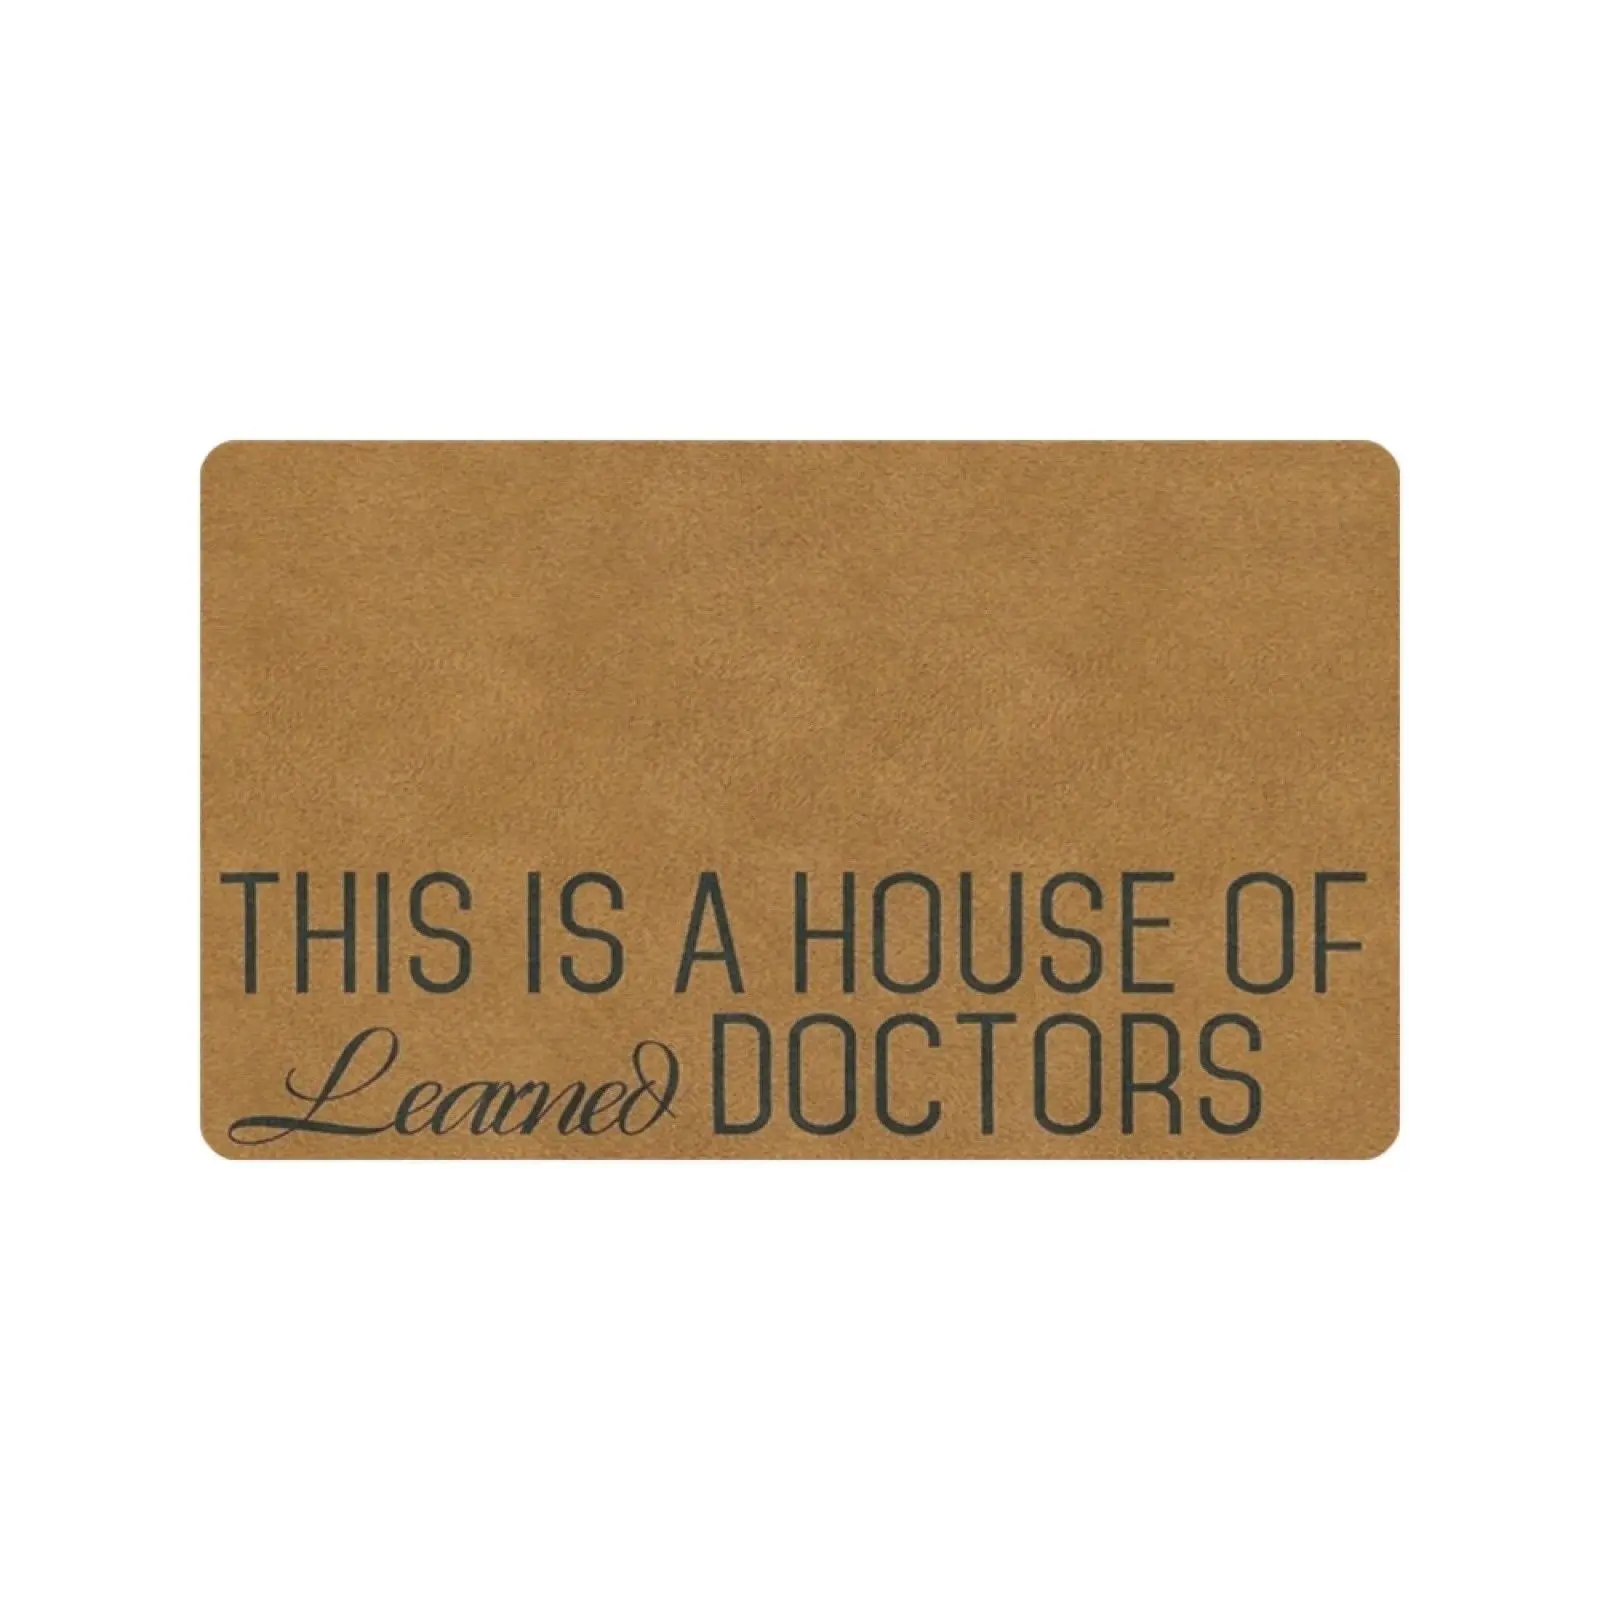 

This Is A House Of Learned Doctors Doormat Step Brothers Movie Decor Housewarming Porch Rug Entrance Door Floor Mat